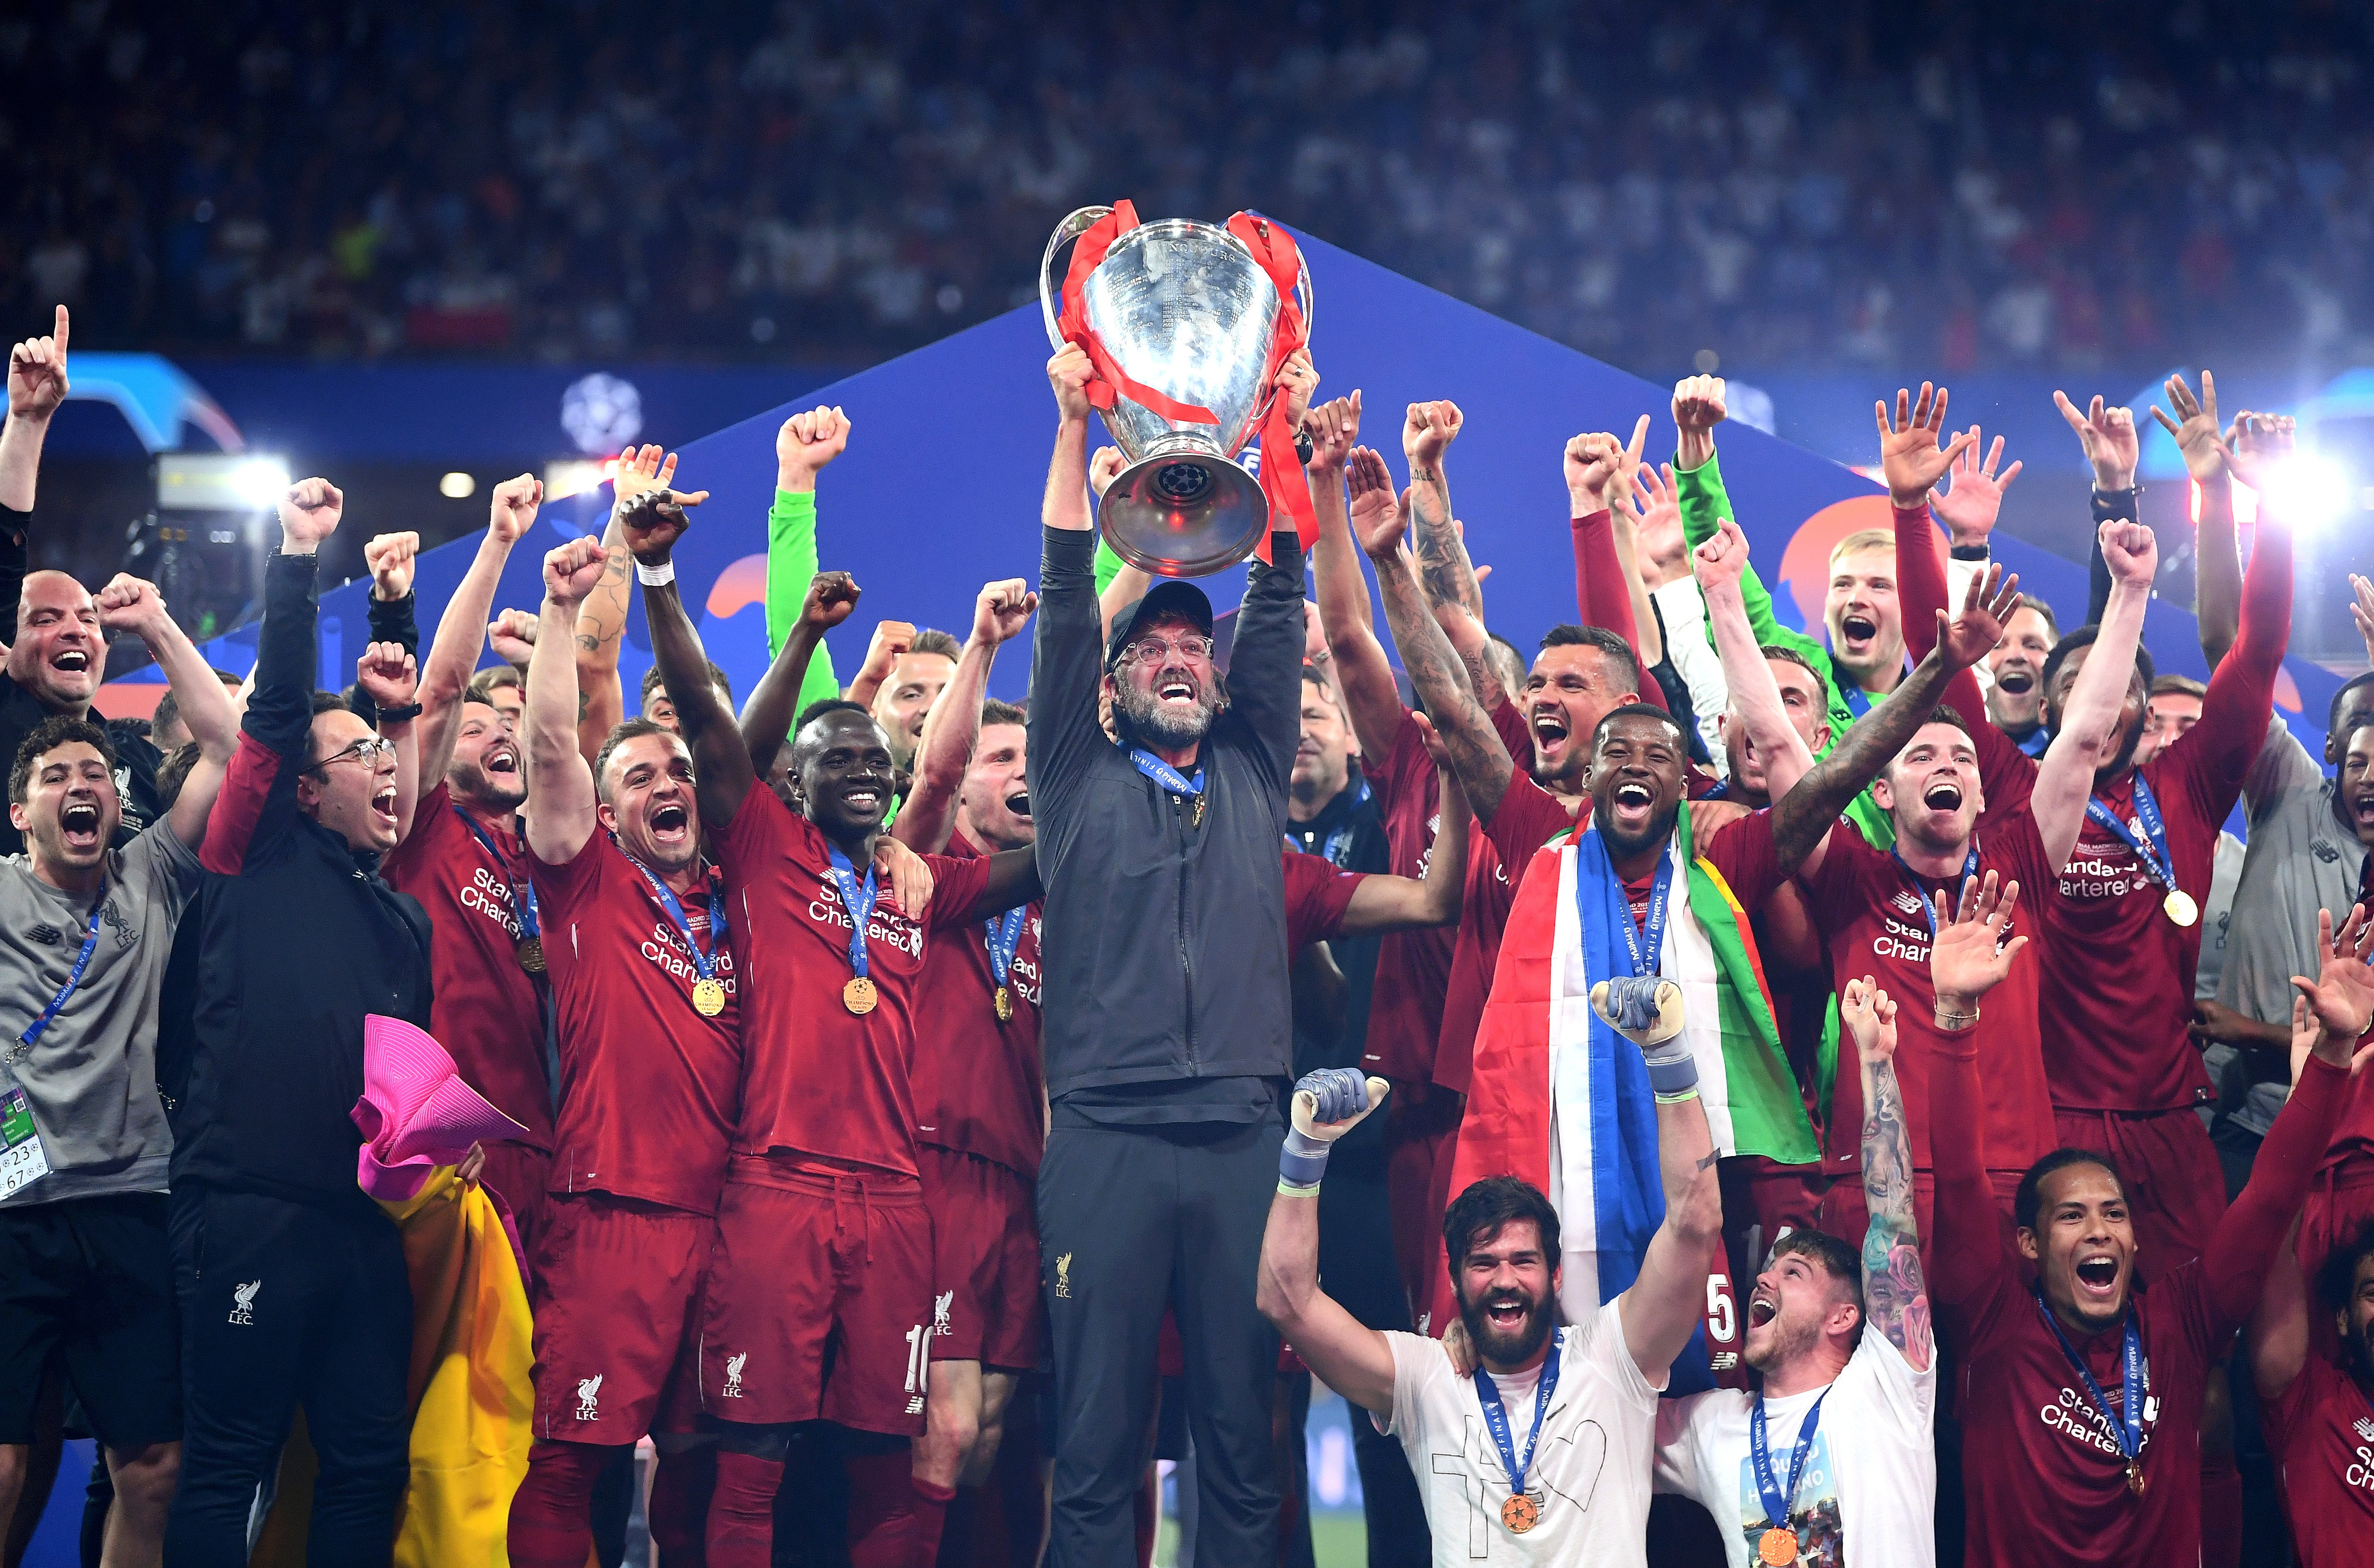 Jurgen Klopp won the Champions League with Liverpool in 2019